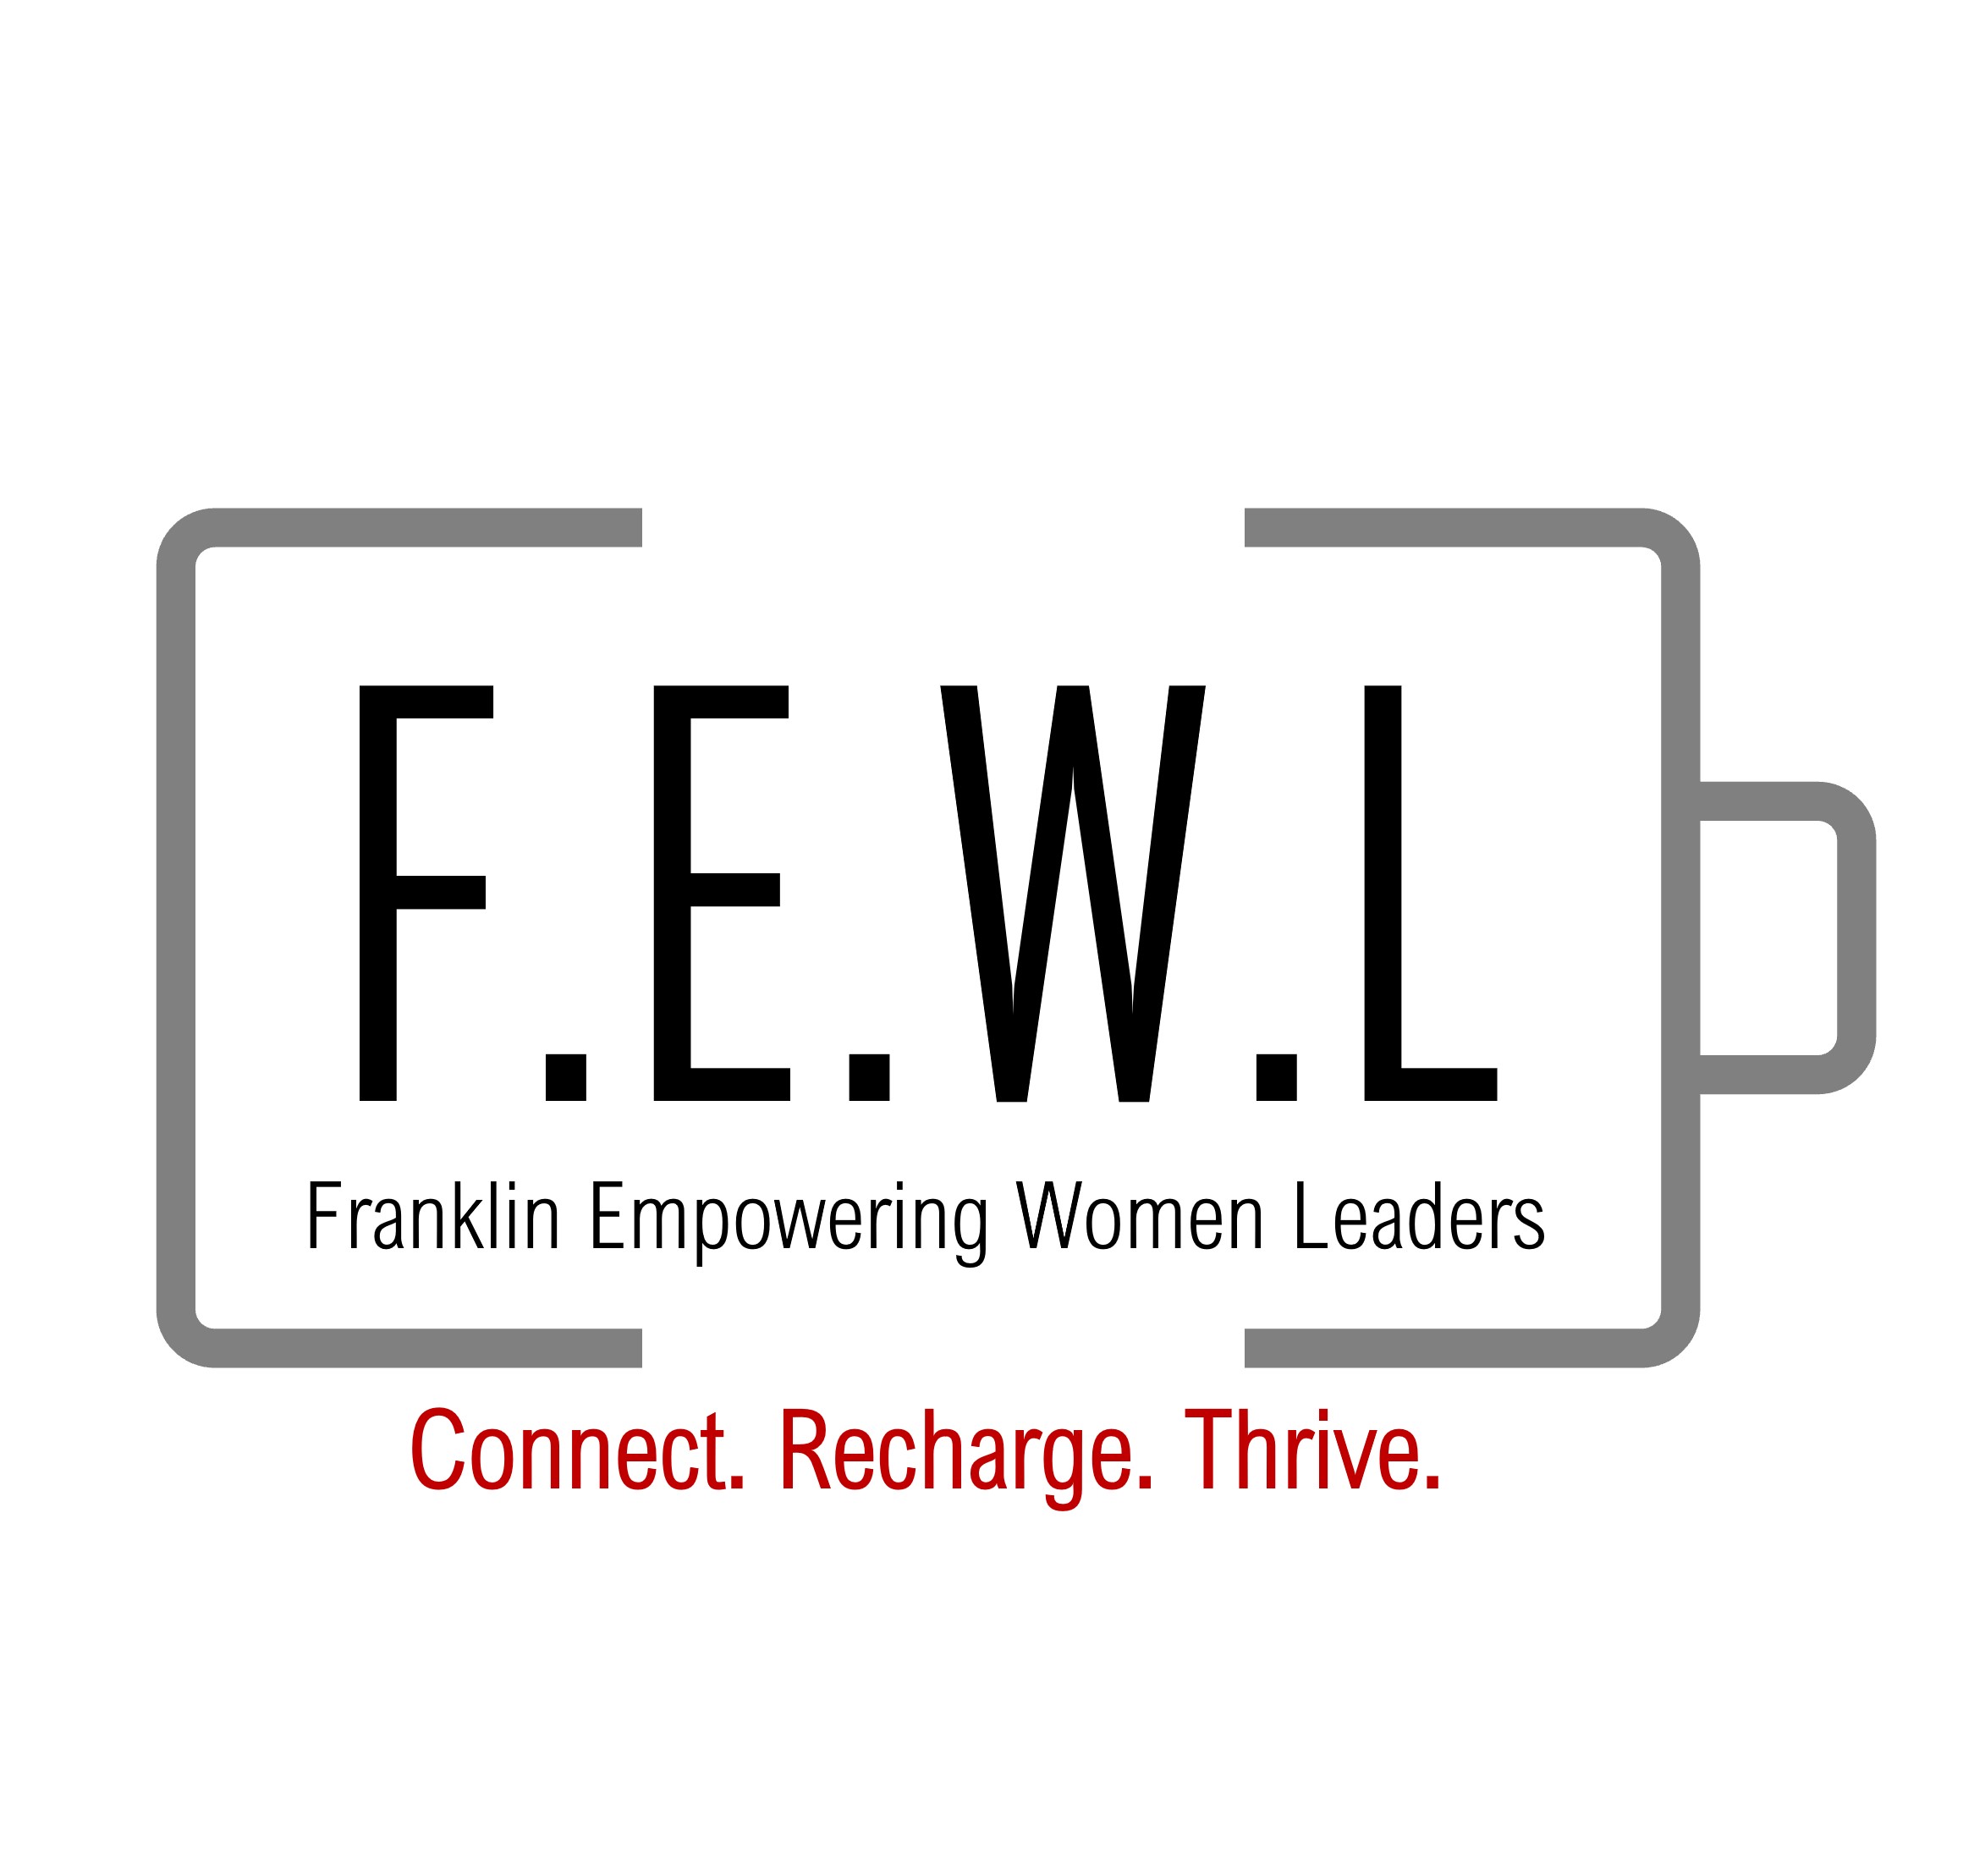 Franklin Empowering Women Leaders logo of a battery